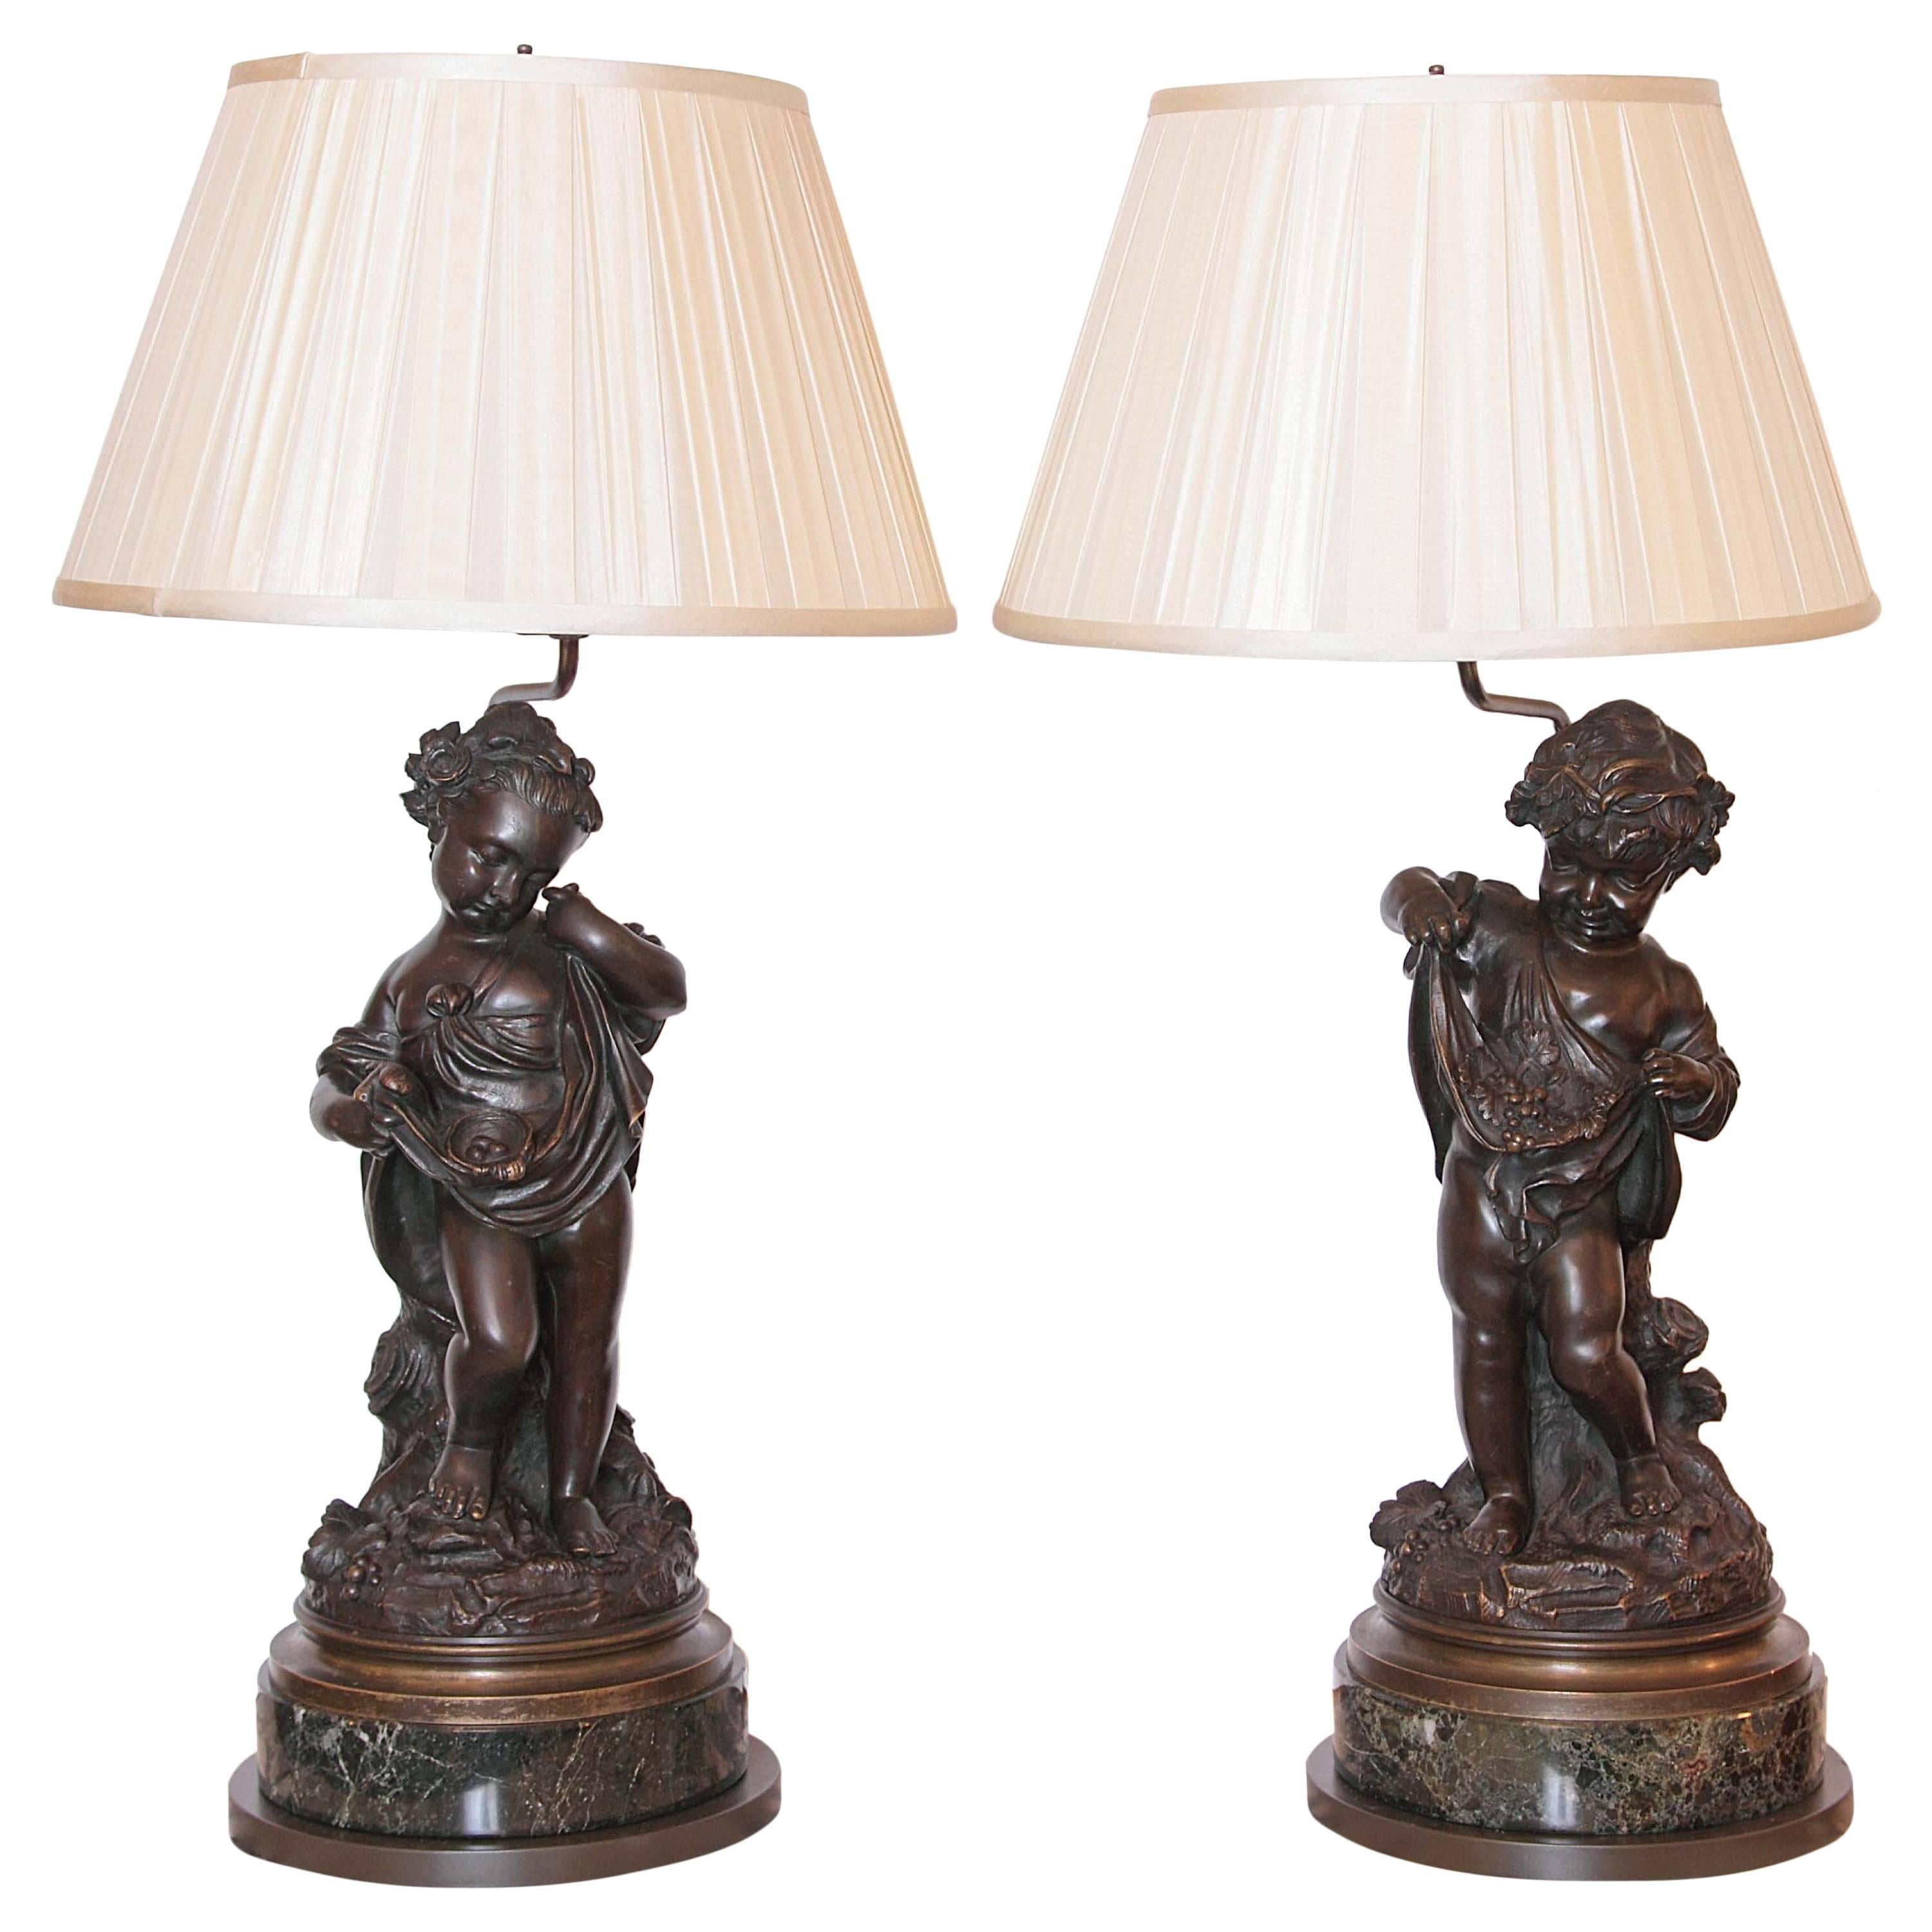 Pair of 19th Century French Patinated Bronze Figures of Cherubs Made into Lamps